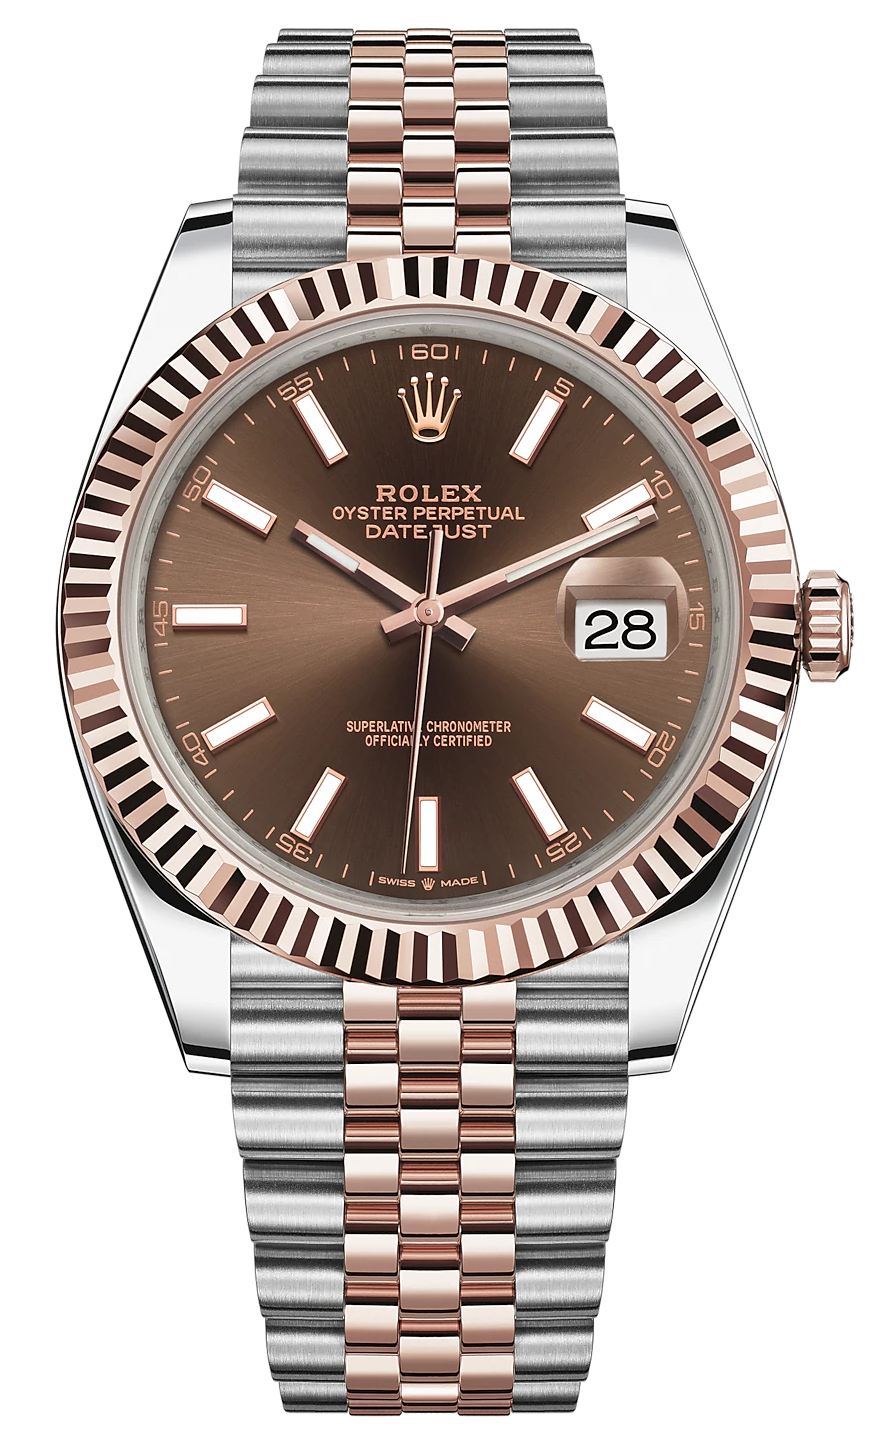 Rolex Datejust 41 Steel Rose Gold Chocolate Dial Watch 126331 copy